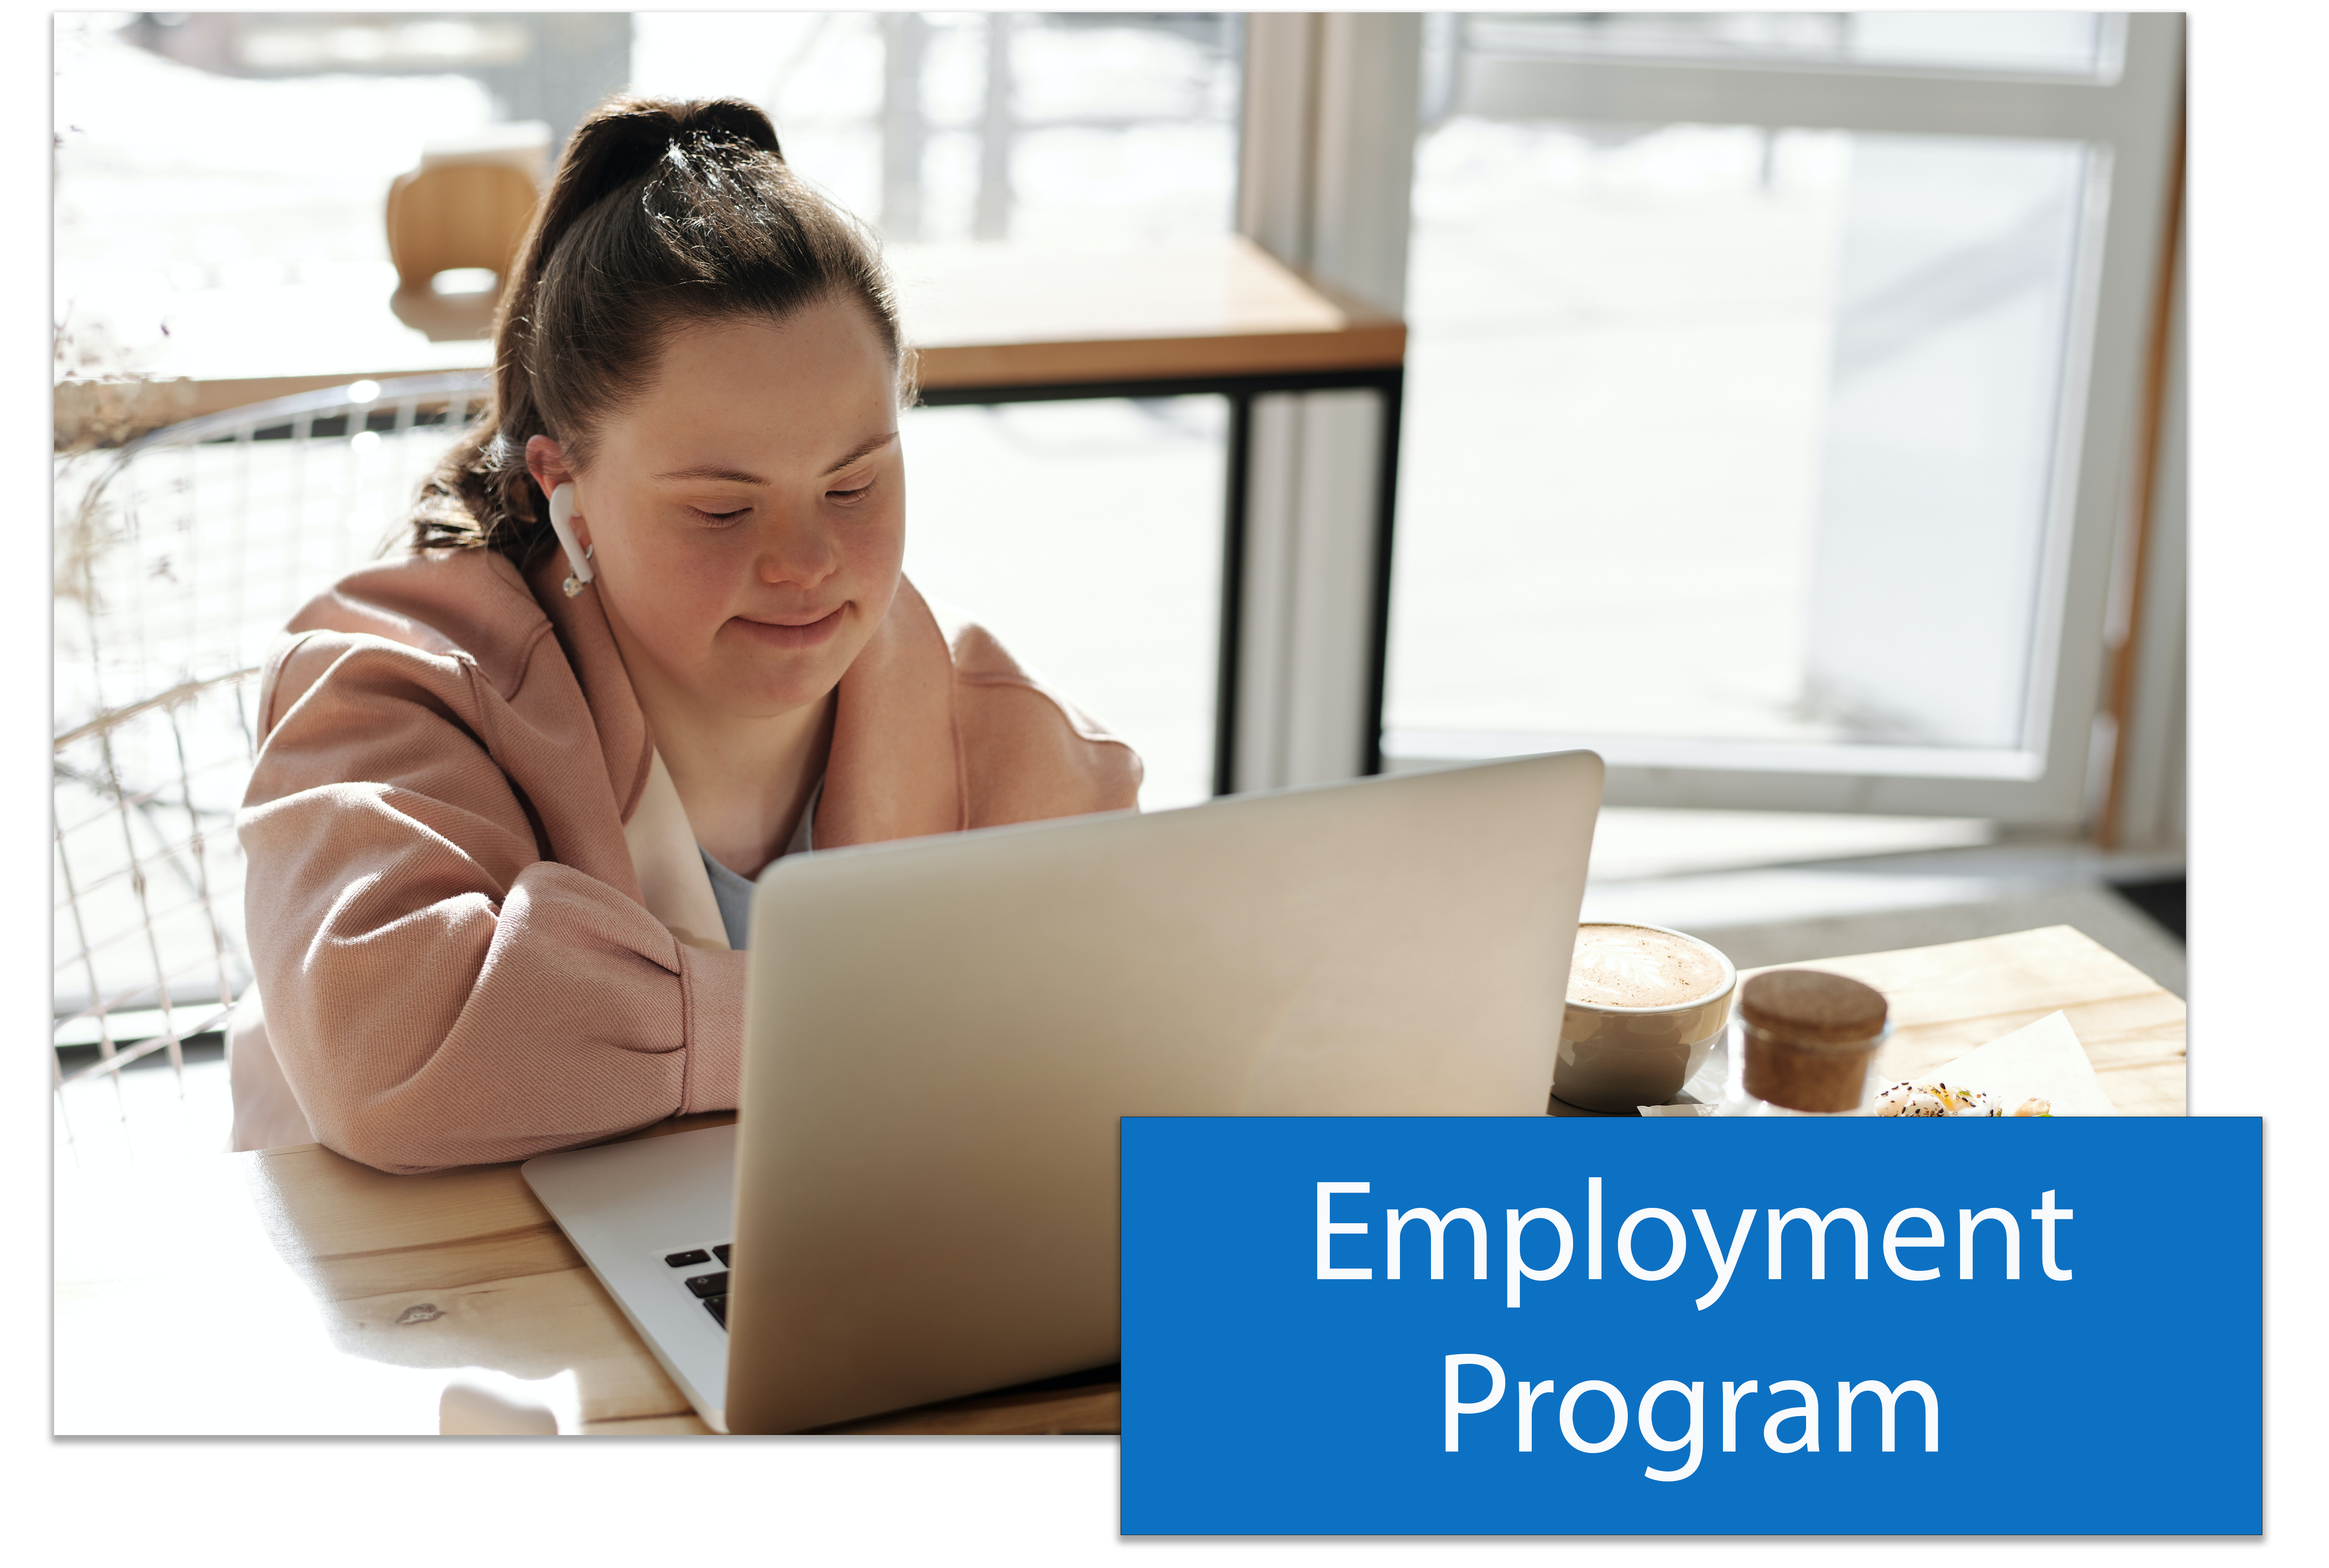 A button that says Employment Program placed in the lower right hand corner of an image of a woman with Downs Syndrome working on a laptop at a desk.